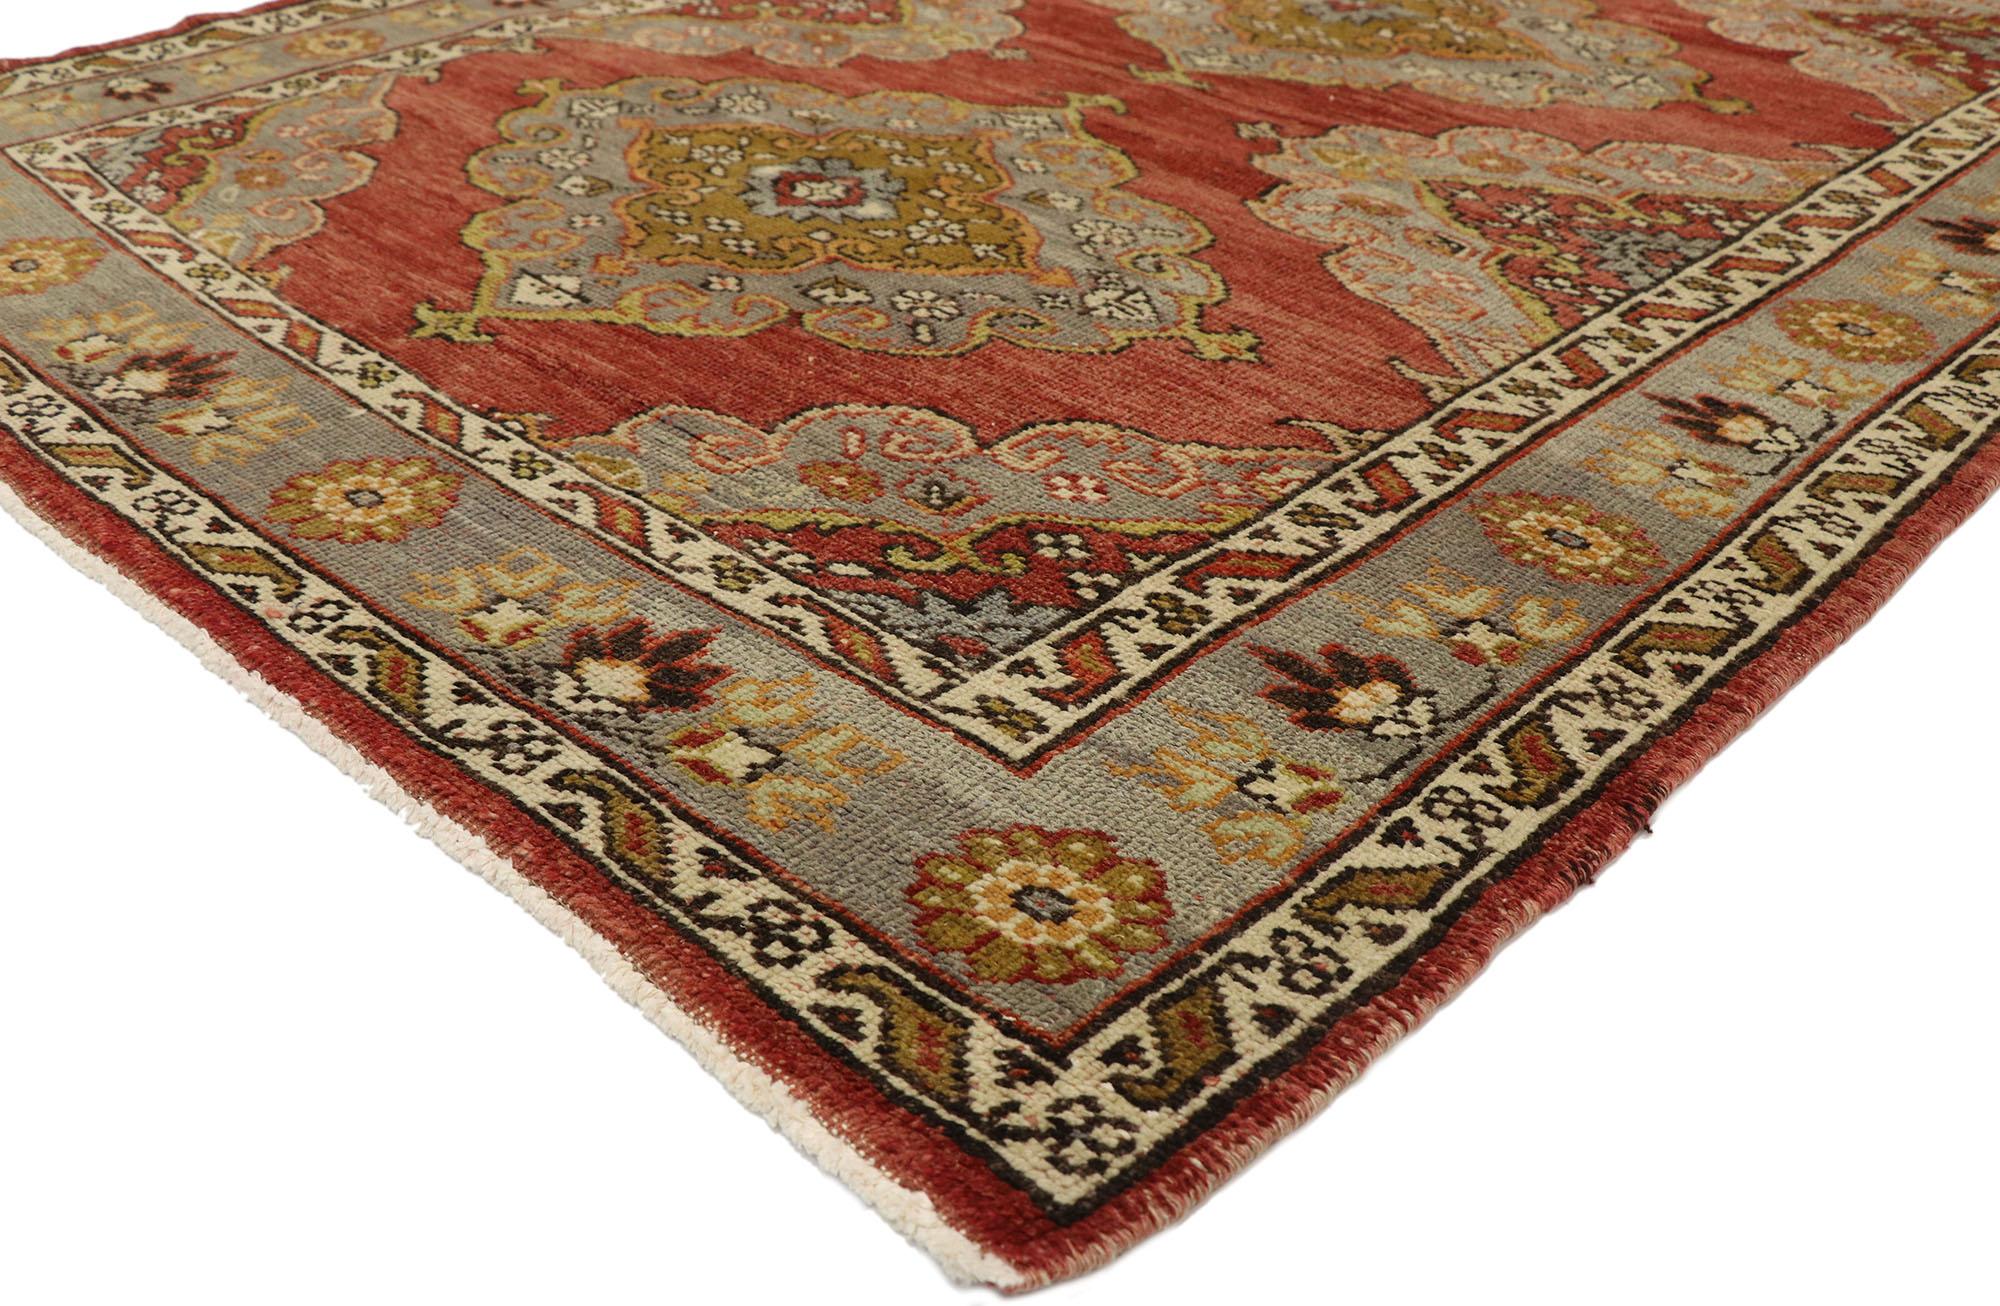 51797, vintage Turkish Oushak gallery rug with Jacobean style, wide hallway runner. This hand knotted wool vintage Turkish Oushak gallery rug features five cusped medallions with anchor tips at the four corners, each set with a smaller cusped